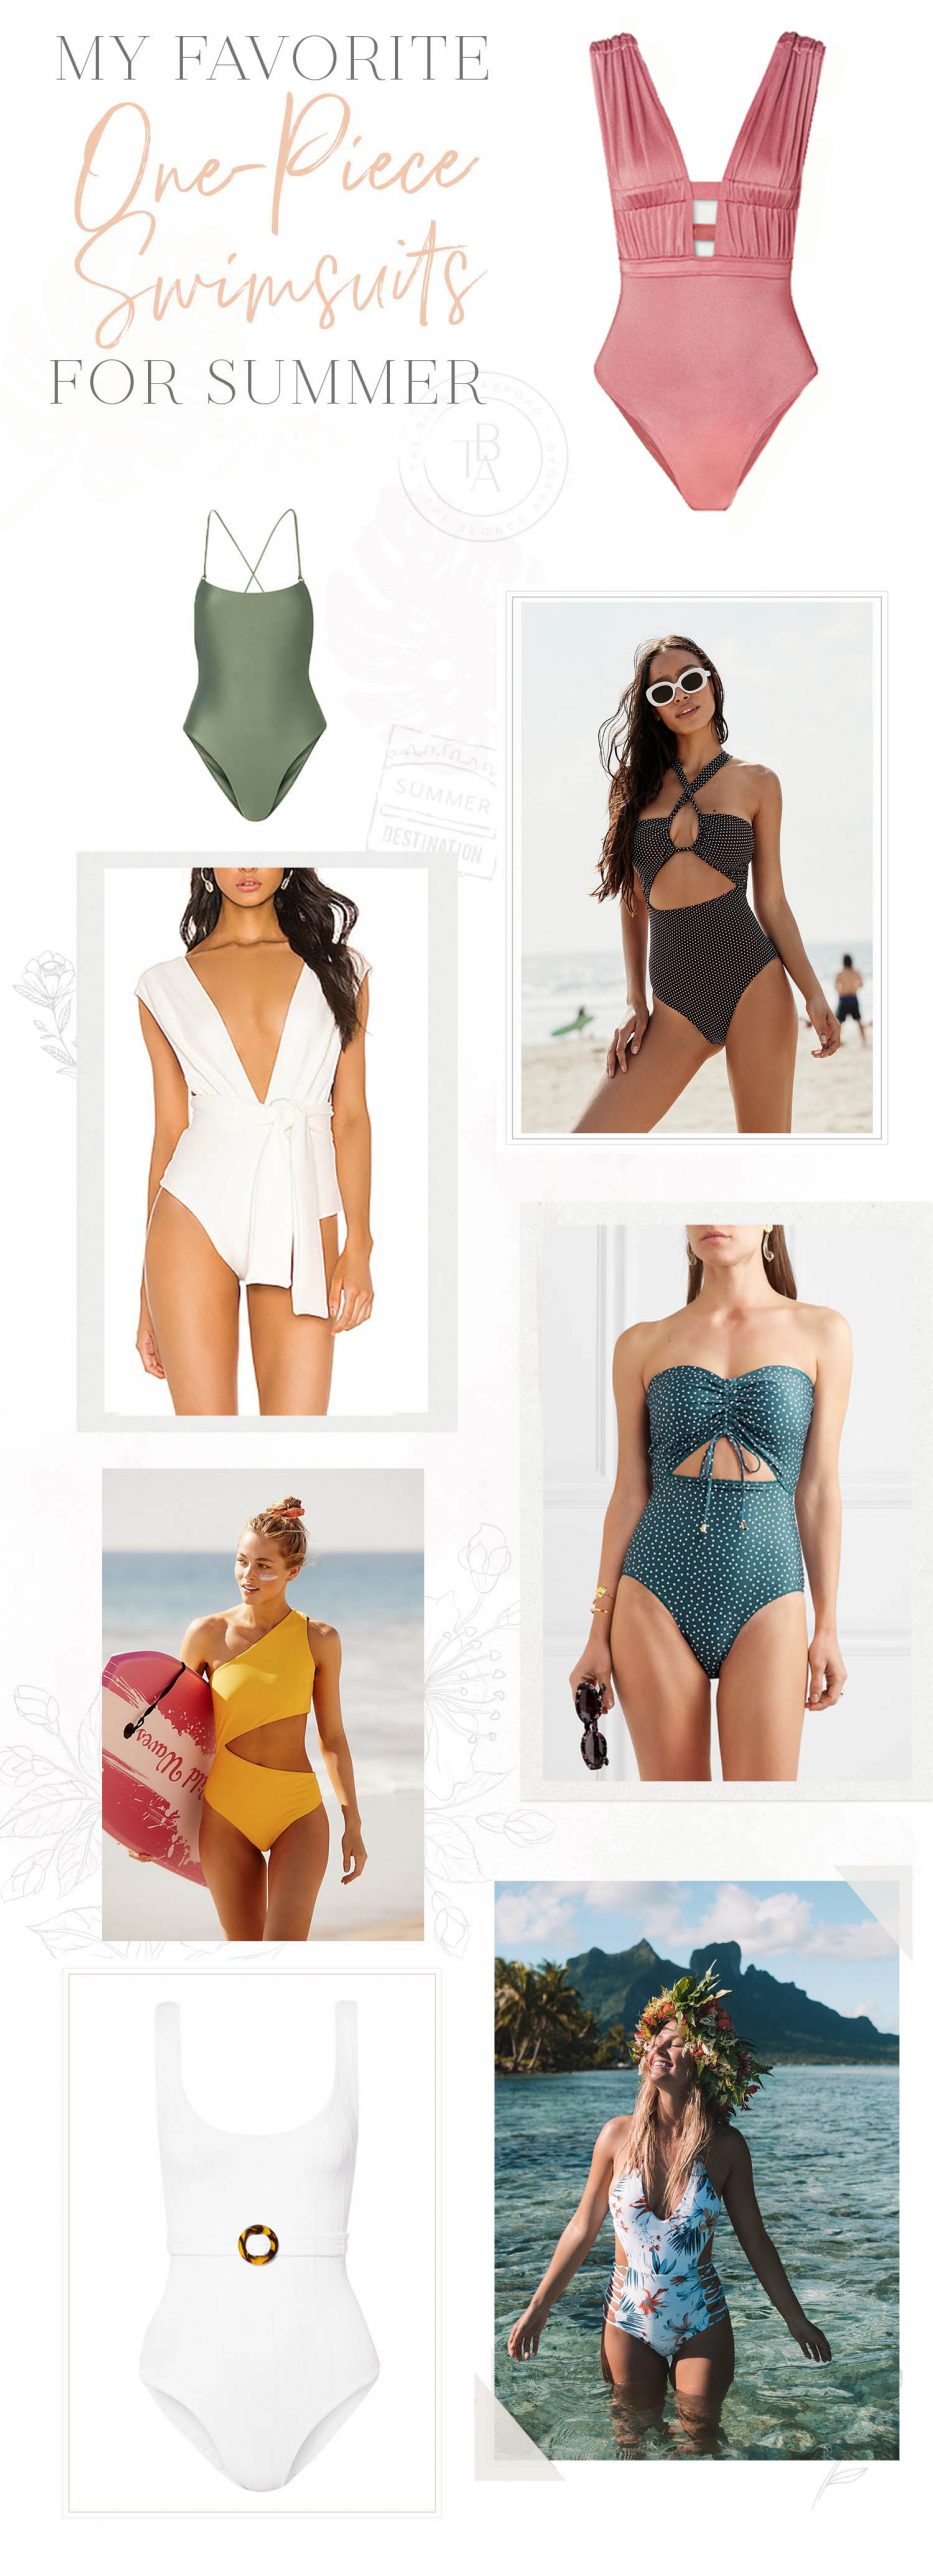 1Favorite One Piece Swimsuits